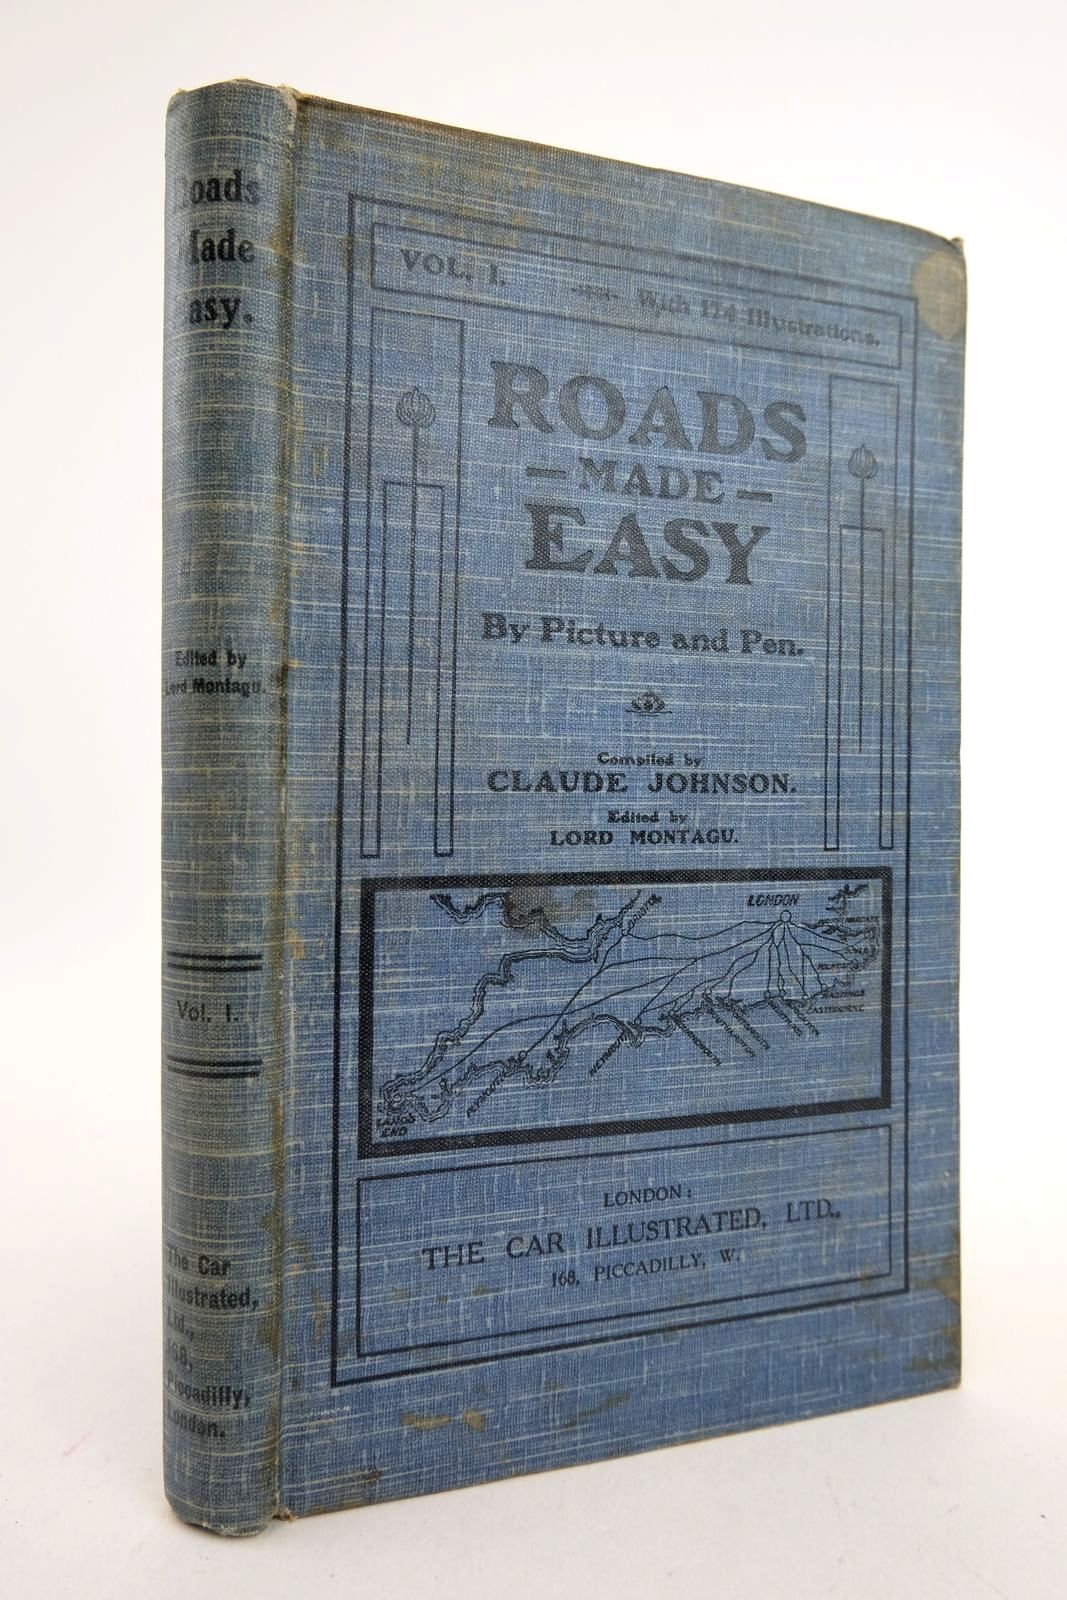 Photo of ROADS MADE EASY IN PICTURE AND PEN written by Johnson, Claude Montagu, Lord published by The Car Illustrated (STOCK CODE: 2133279)  for sale by Stella & Rose's Books